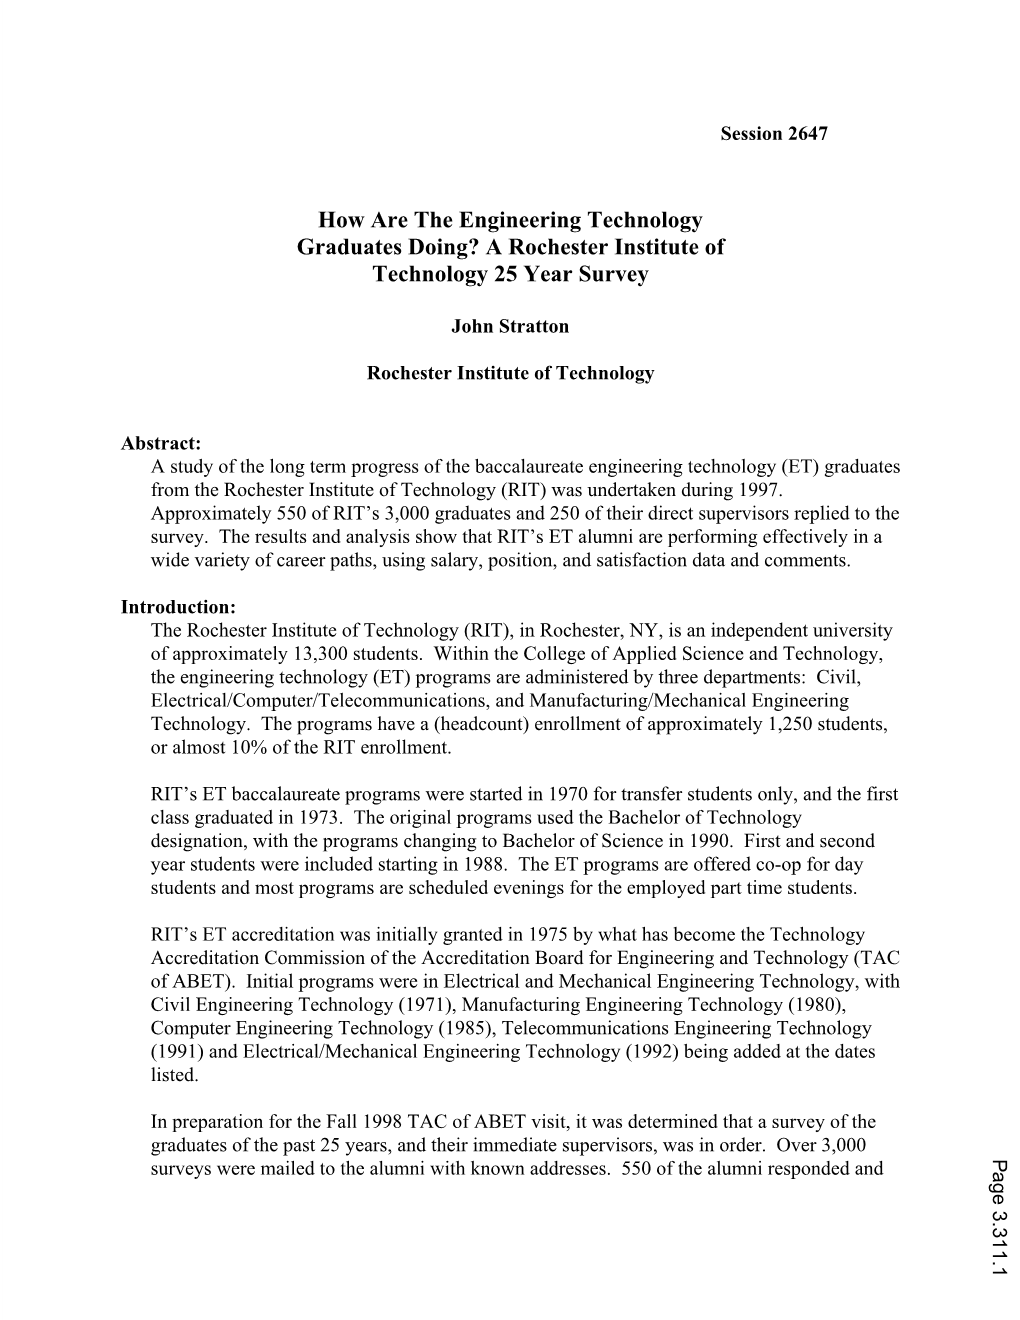 How Are the Engineering Technology Graduates Doing? a Rochester Institute of Technology 25 Year Survey